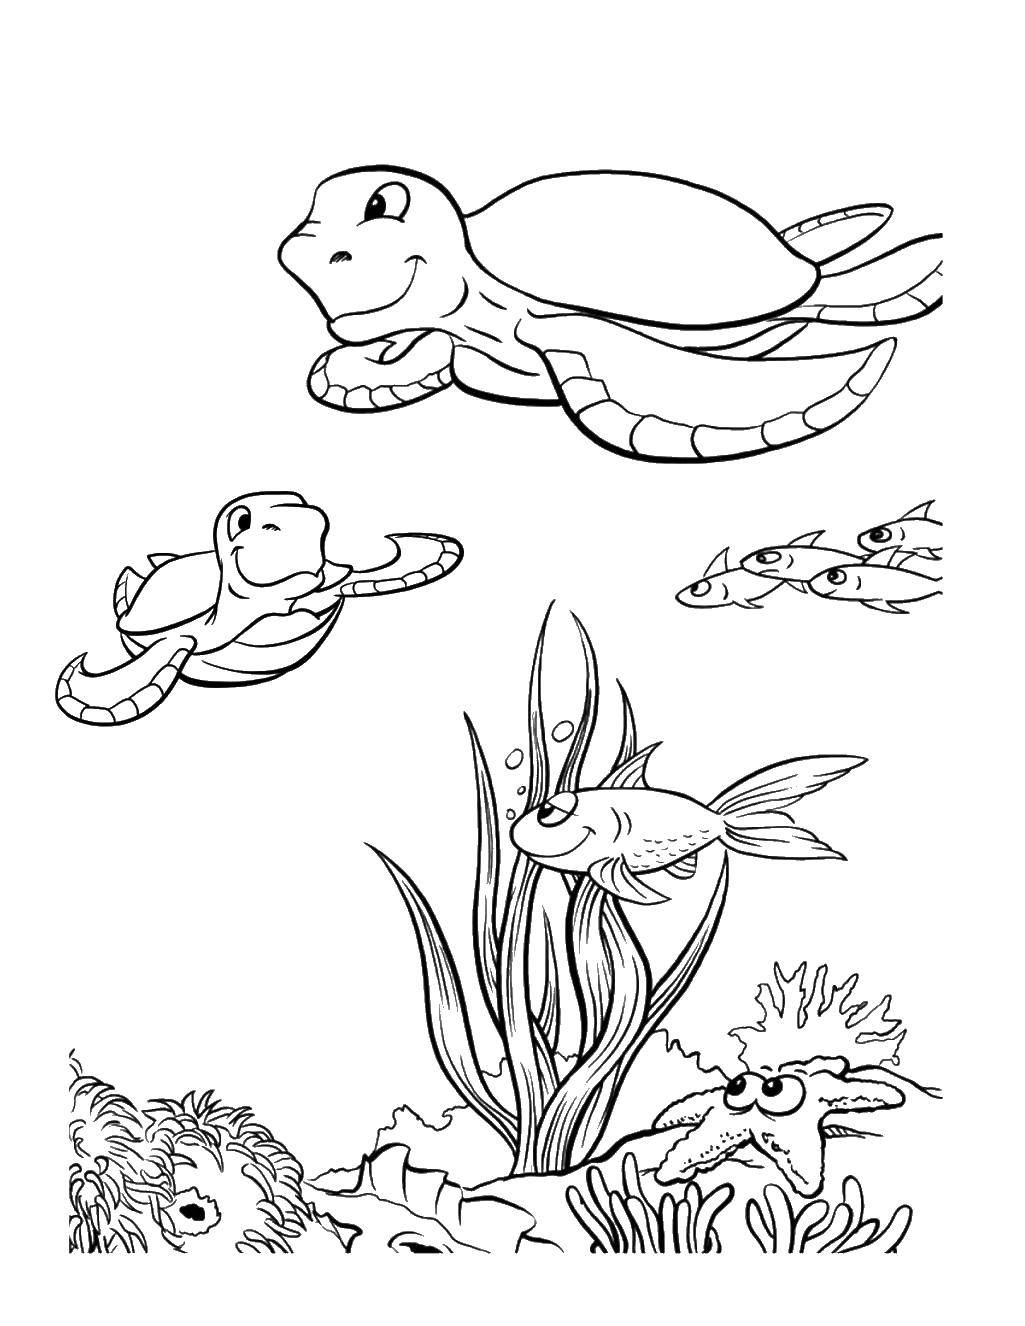 Coloring Happy sea turtles. Category Marine animals. Tags:  Reptile, turtle.